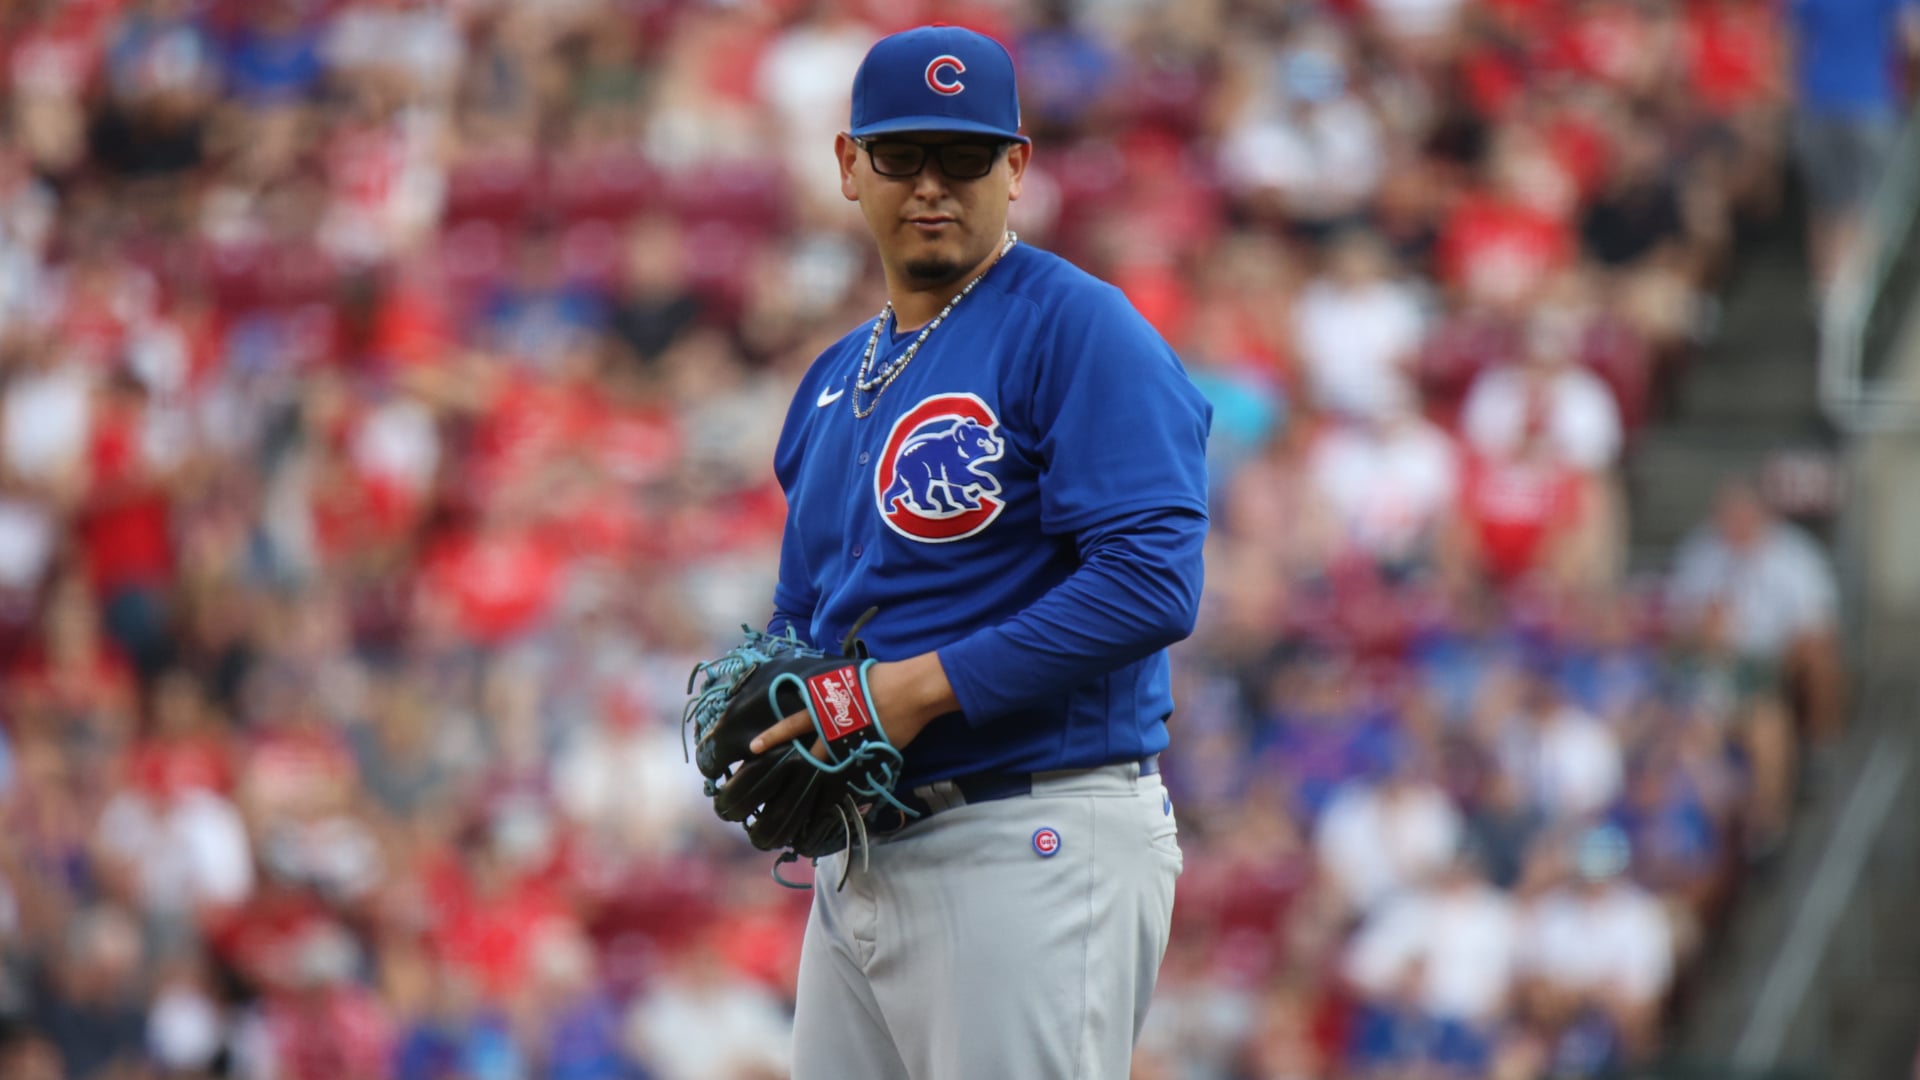 David Ross says Nico Hoerner sets the tone in the Cubs clubhouse and p